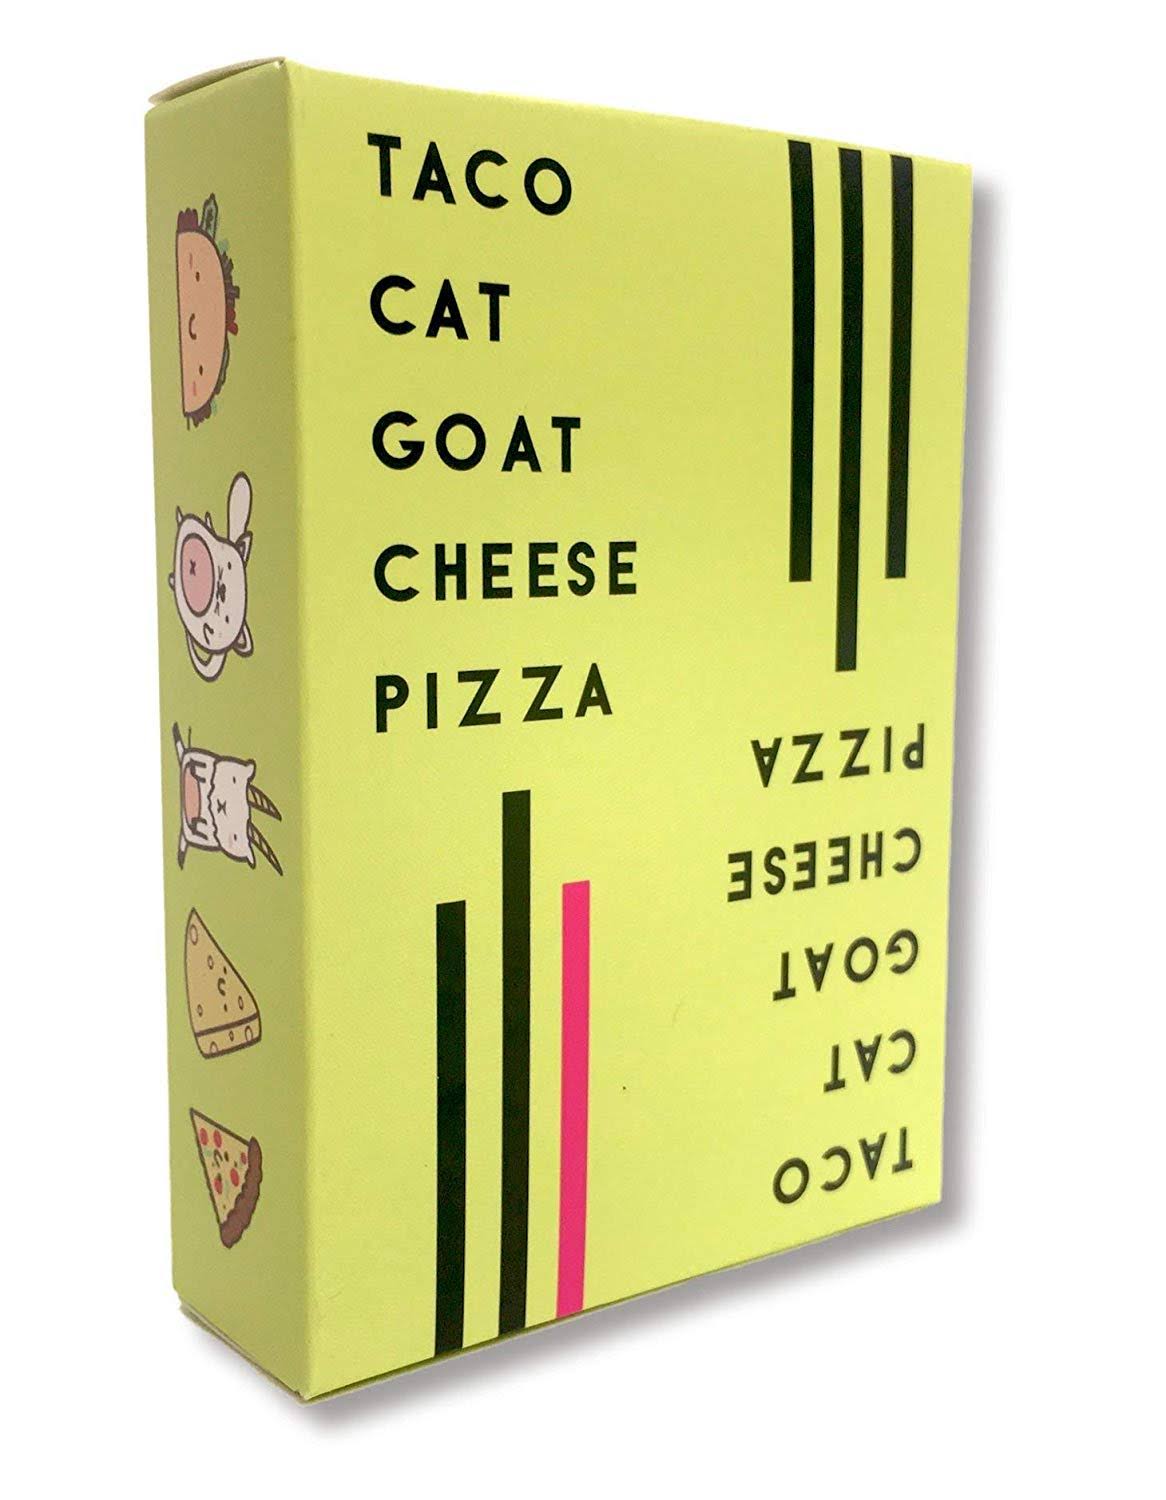 Taco Cat Goat Cheese Pizza Family Board Game